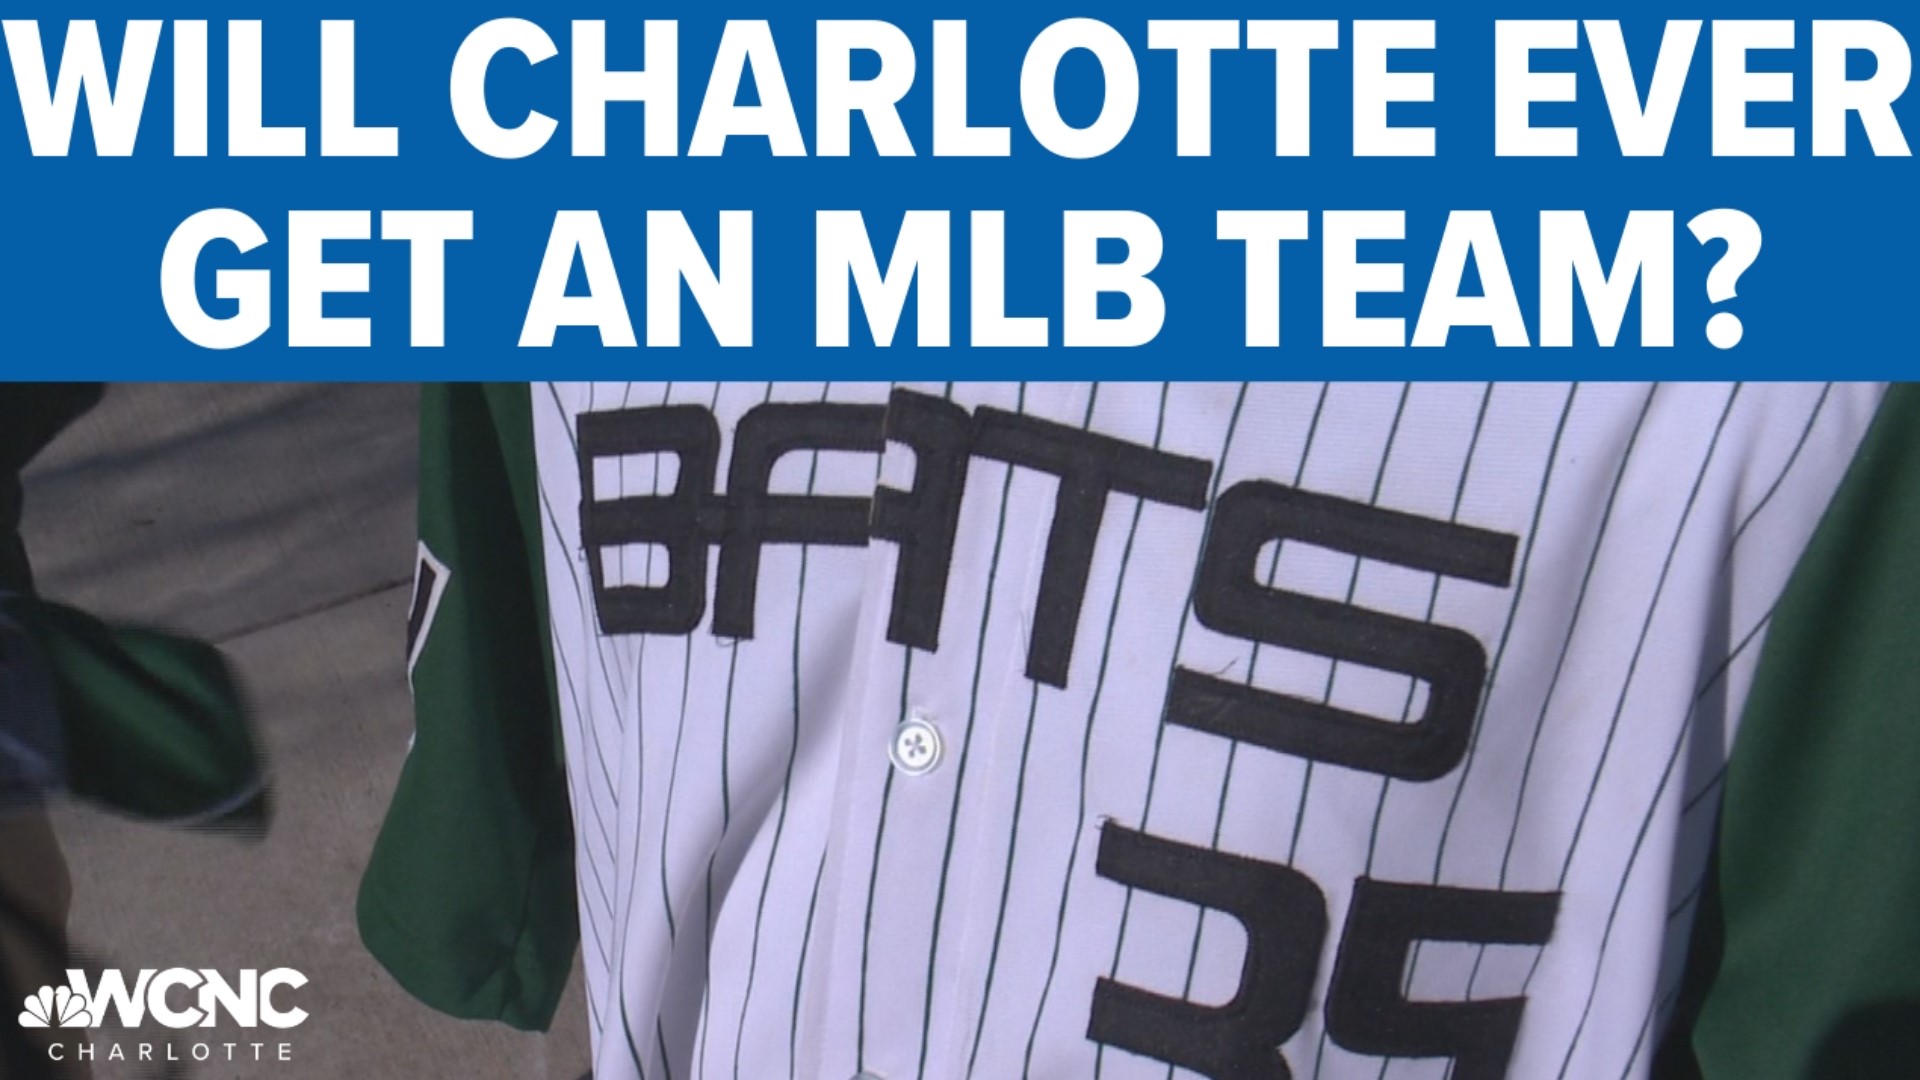 Charlotte is the only U.S. city with NFL, NBA, and MLS teams, but no MLB team. Some hope that changes soon.